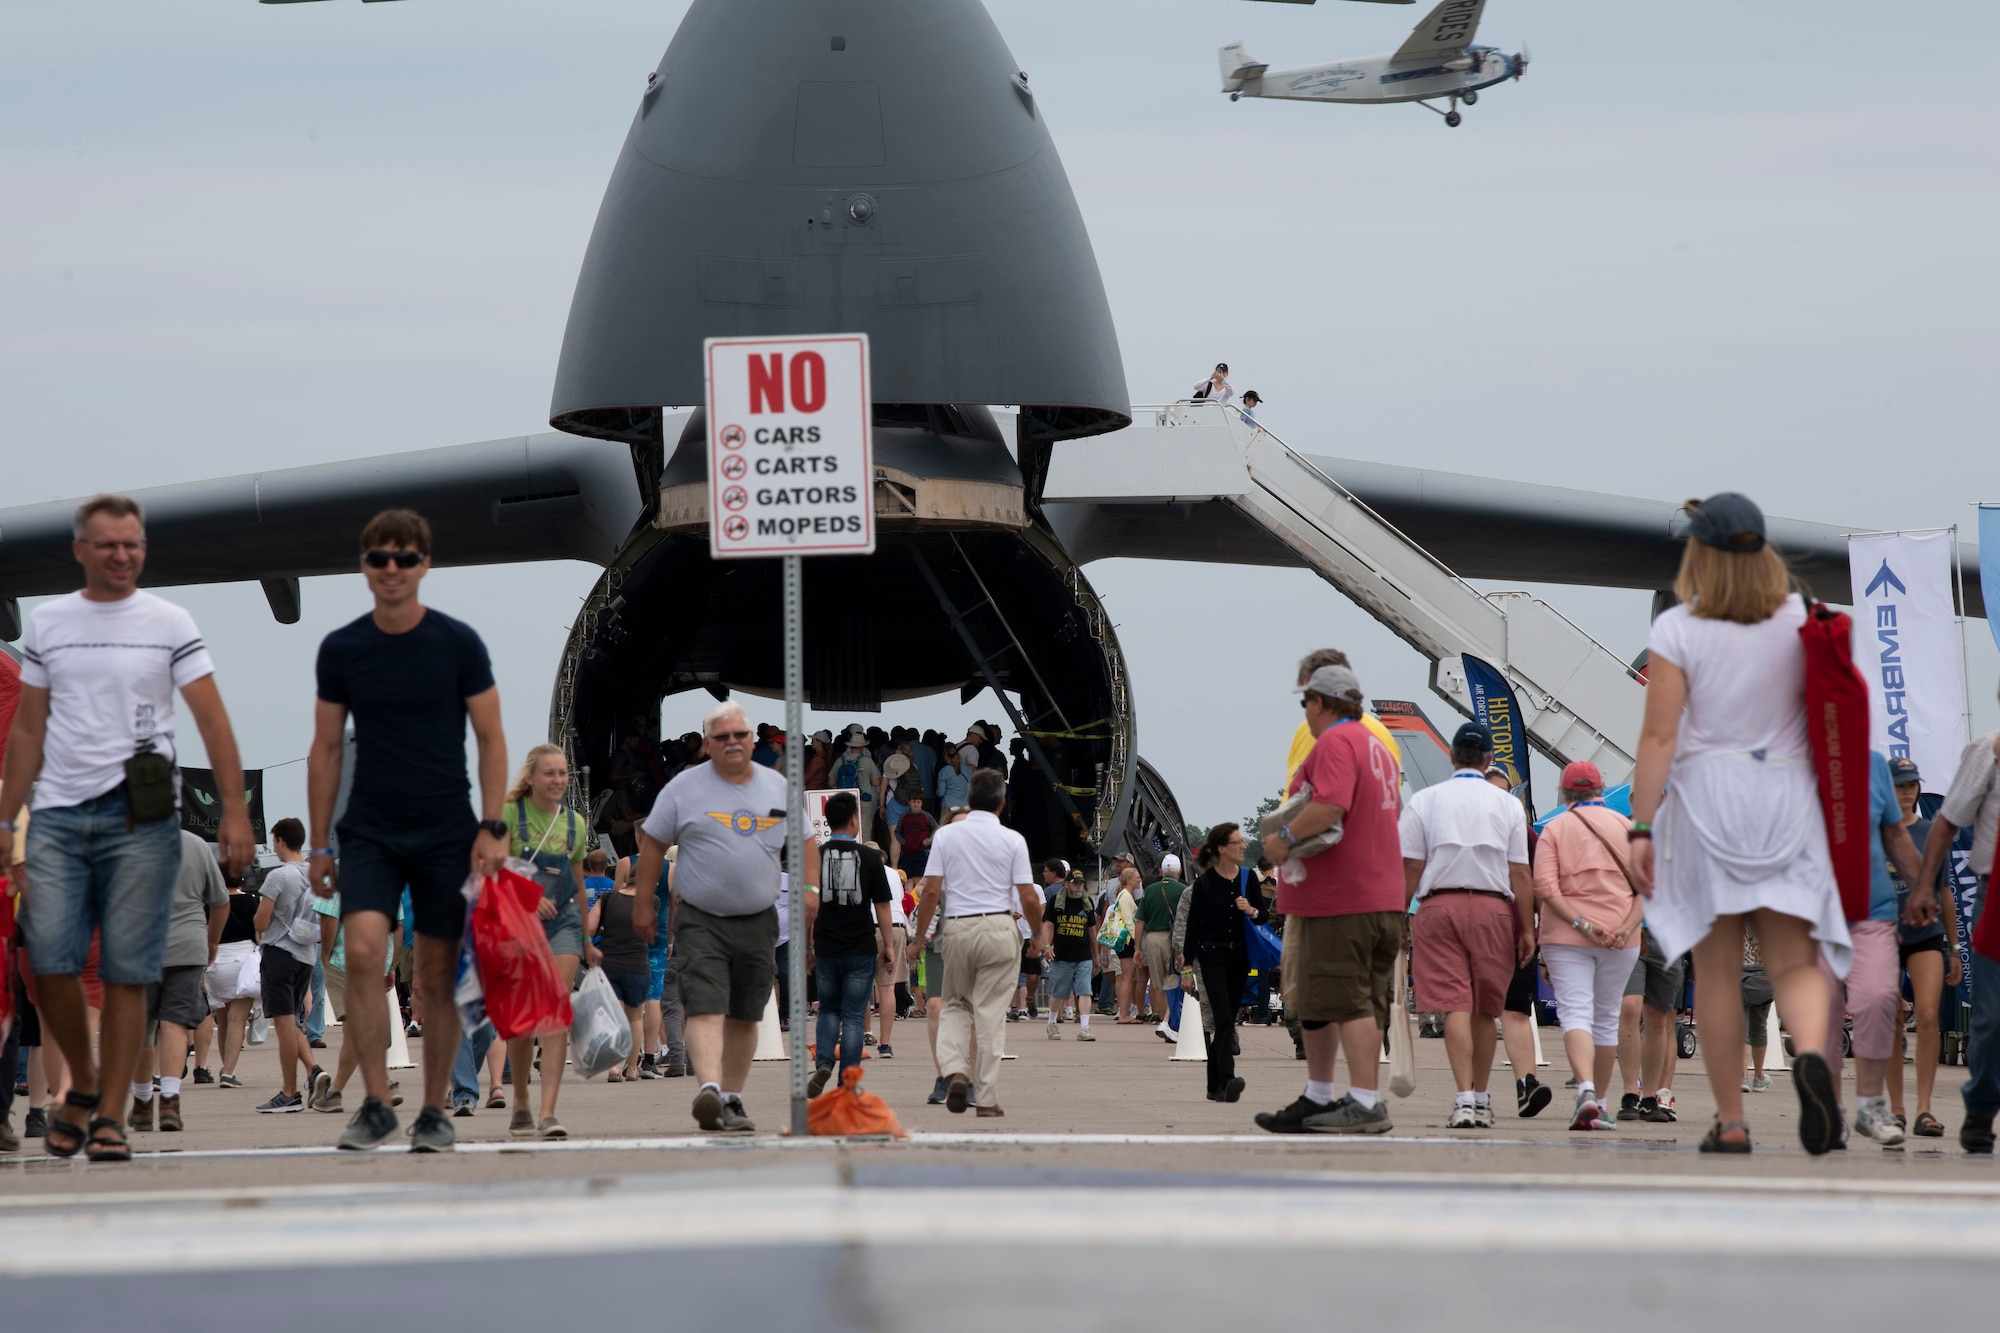 EAA AirVenture attendees walk in front of a C-5M Super Galaxy July 26, 2019, at Whitman Regional Airport in Oshkosh, Wisconsin. The C-5 crew went to EAA AirVenture 2019 where more than 500,000 aviation enthusiasts from 80 countries gathered at the air show to celebrate the past, present and future in the world of aviation. (U.S. Air Force photo by Senior Airman Jonathon Carnell)